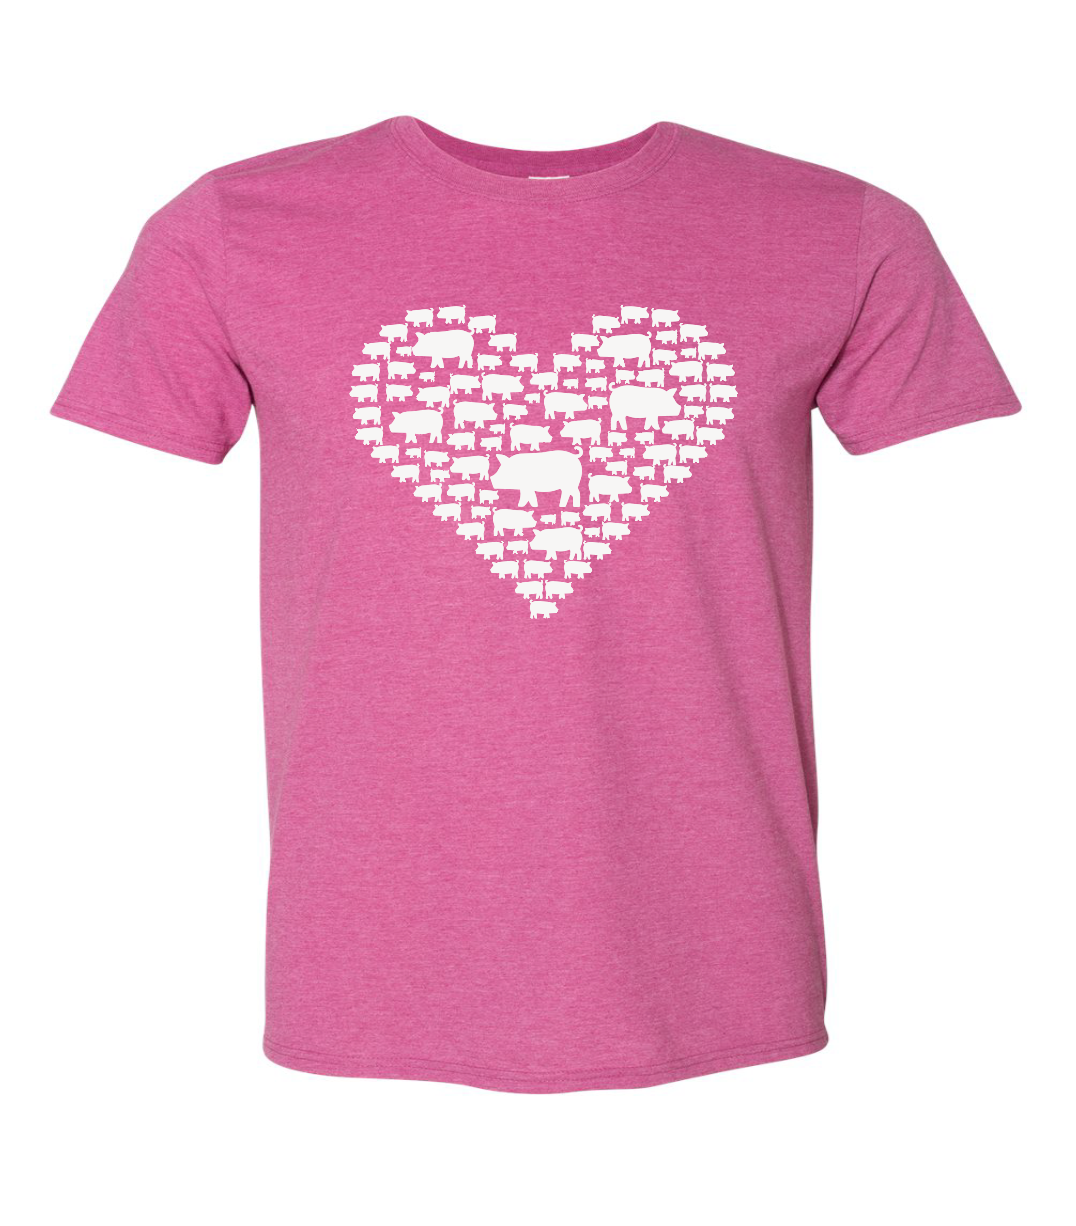 Love Pigs T-Shirt - YOUTH UNISEX - Pink